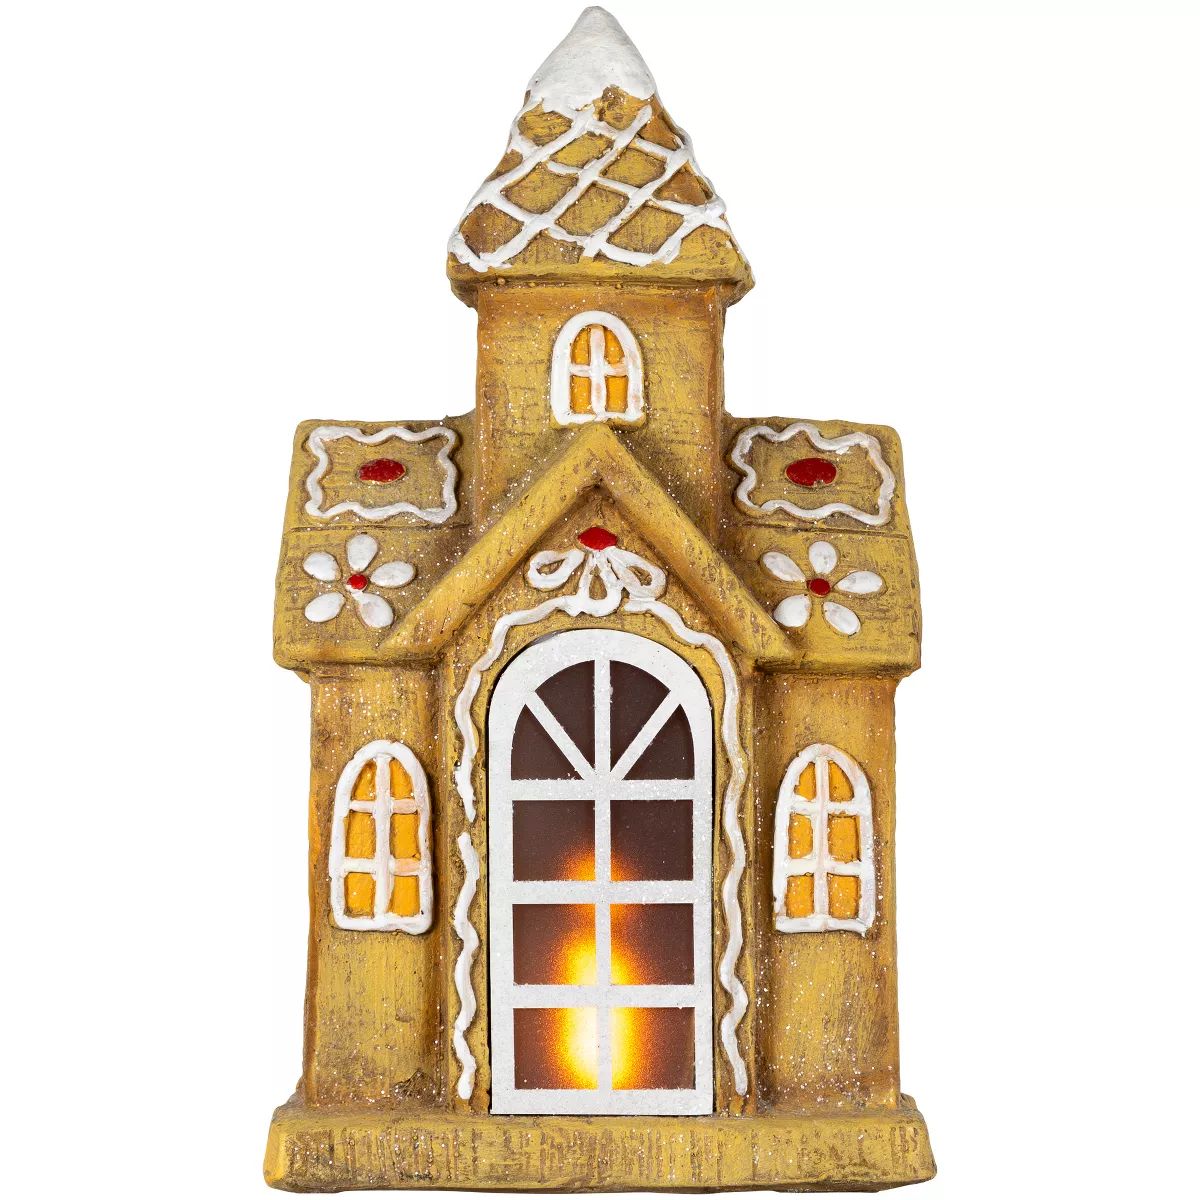 Northlight 16" LED Lighted Gingerbread House Christmas Decoration | Target